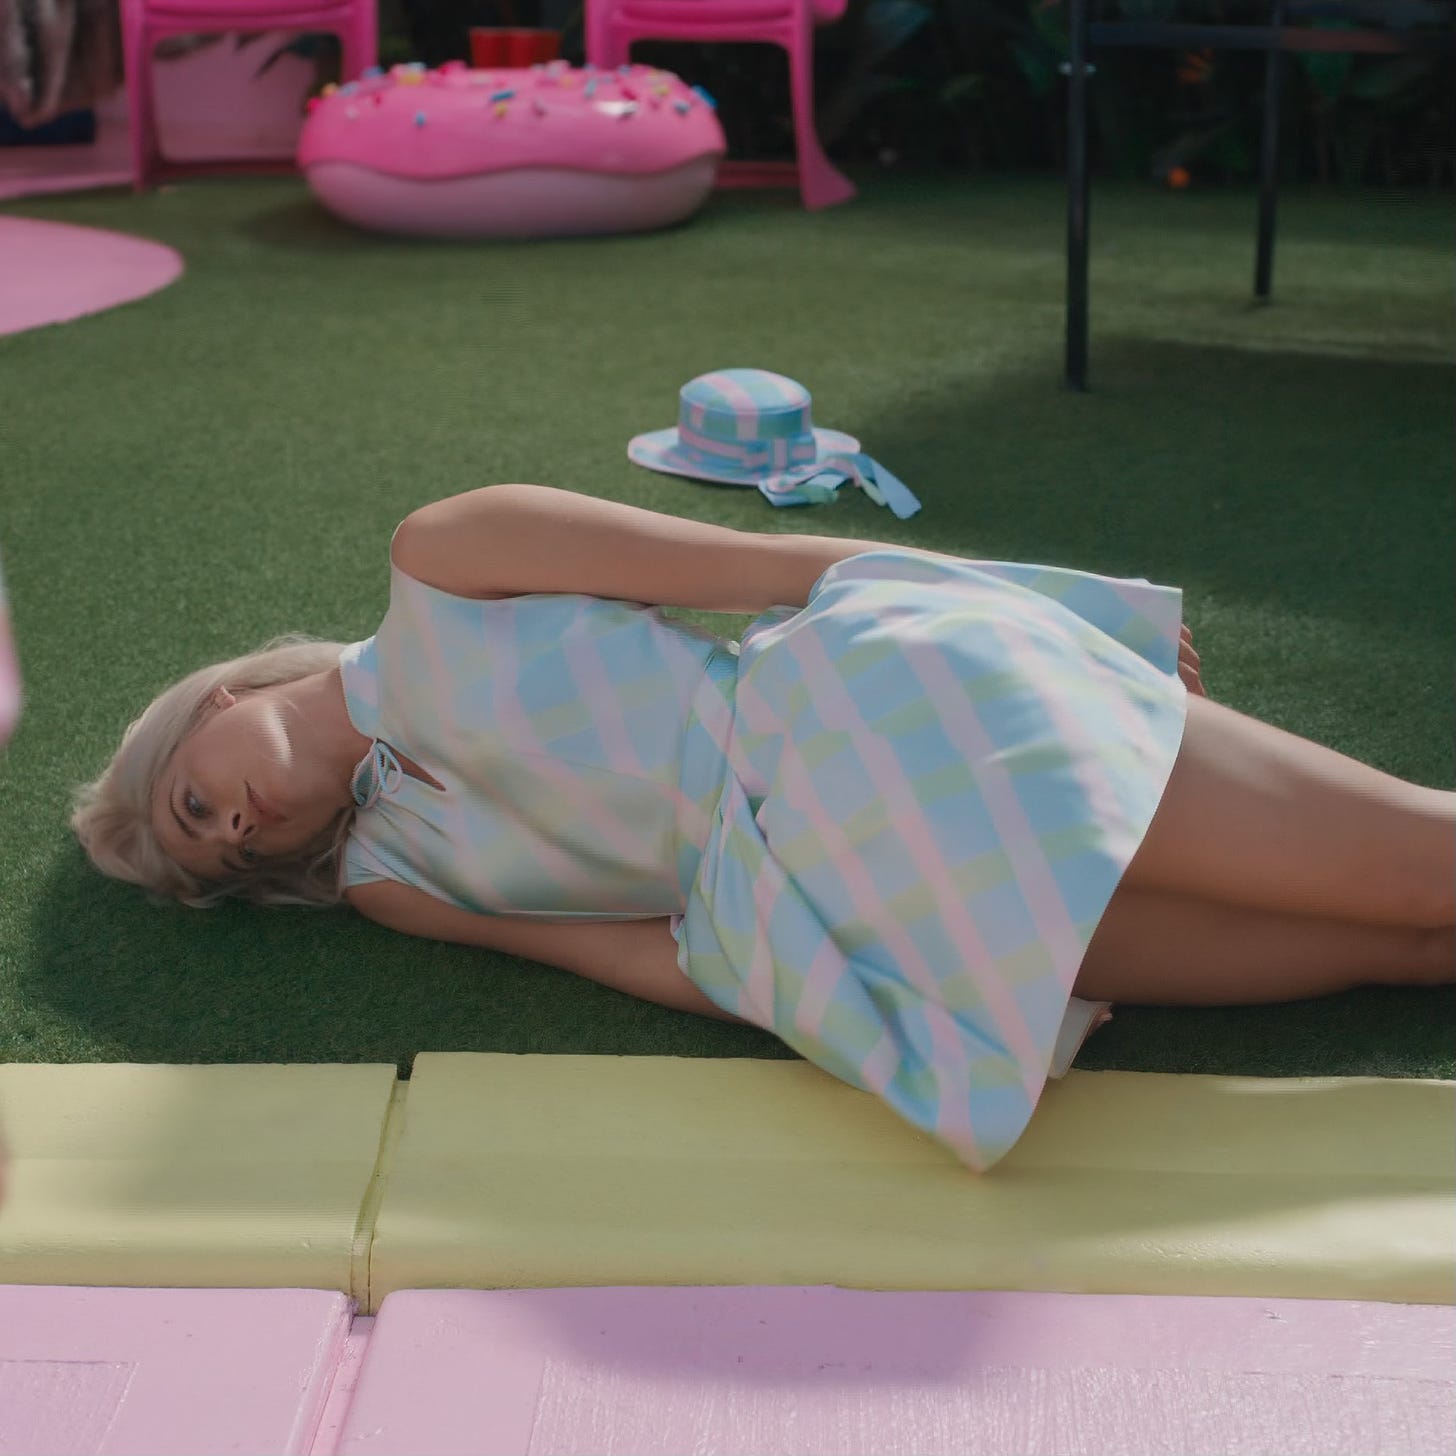 Margot Robbie as Barbie lying on the ground in Barbie land